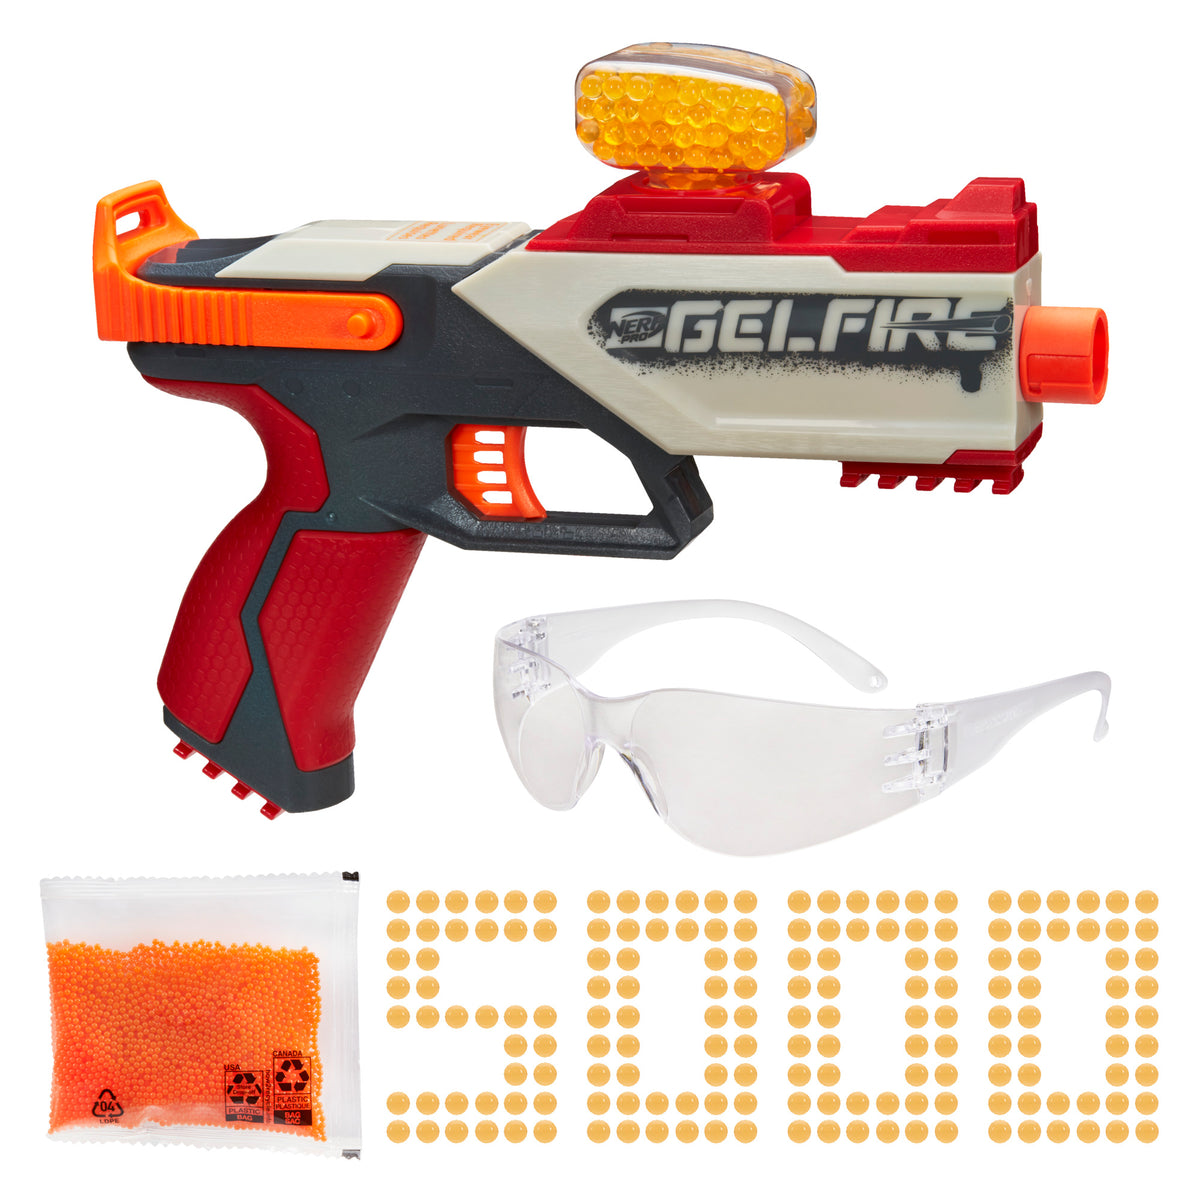 Nerf Modulus  Series Overview & Top Picks 